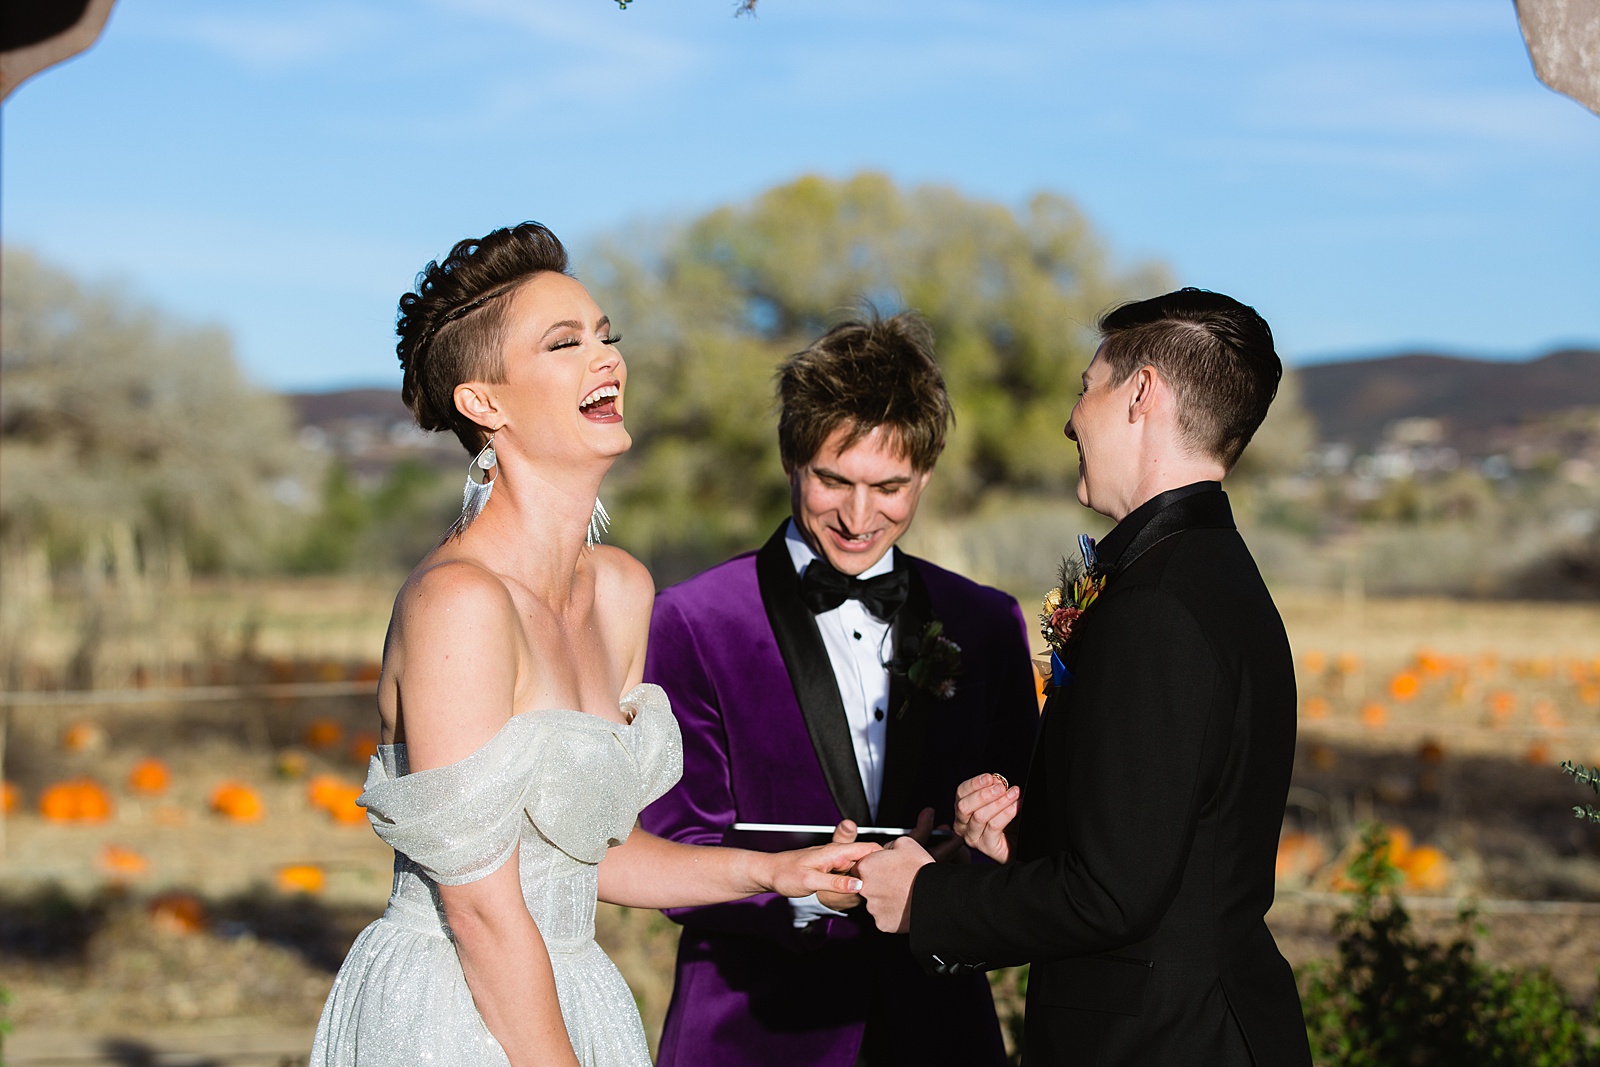 Same sex couple exchange rings during their wedding ceremony at Mortimer Farms by Arizona wedding photographer PMA Photography.